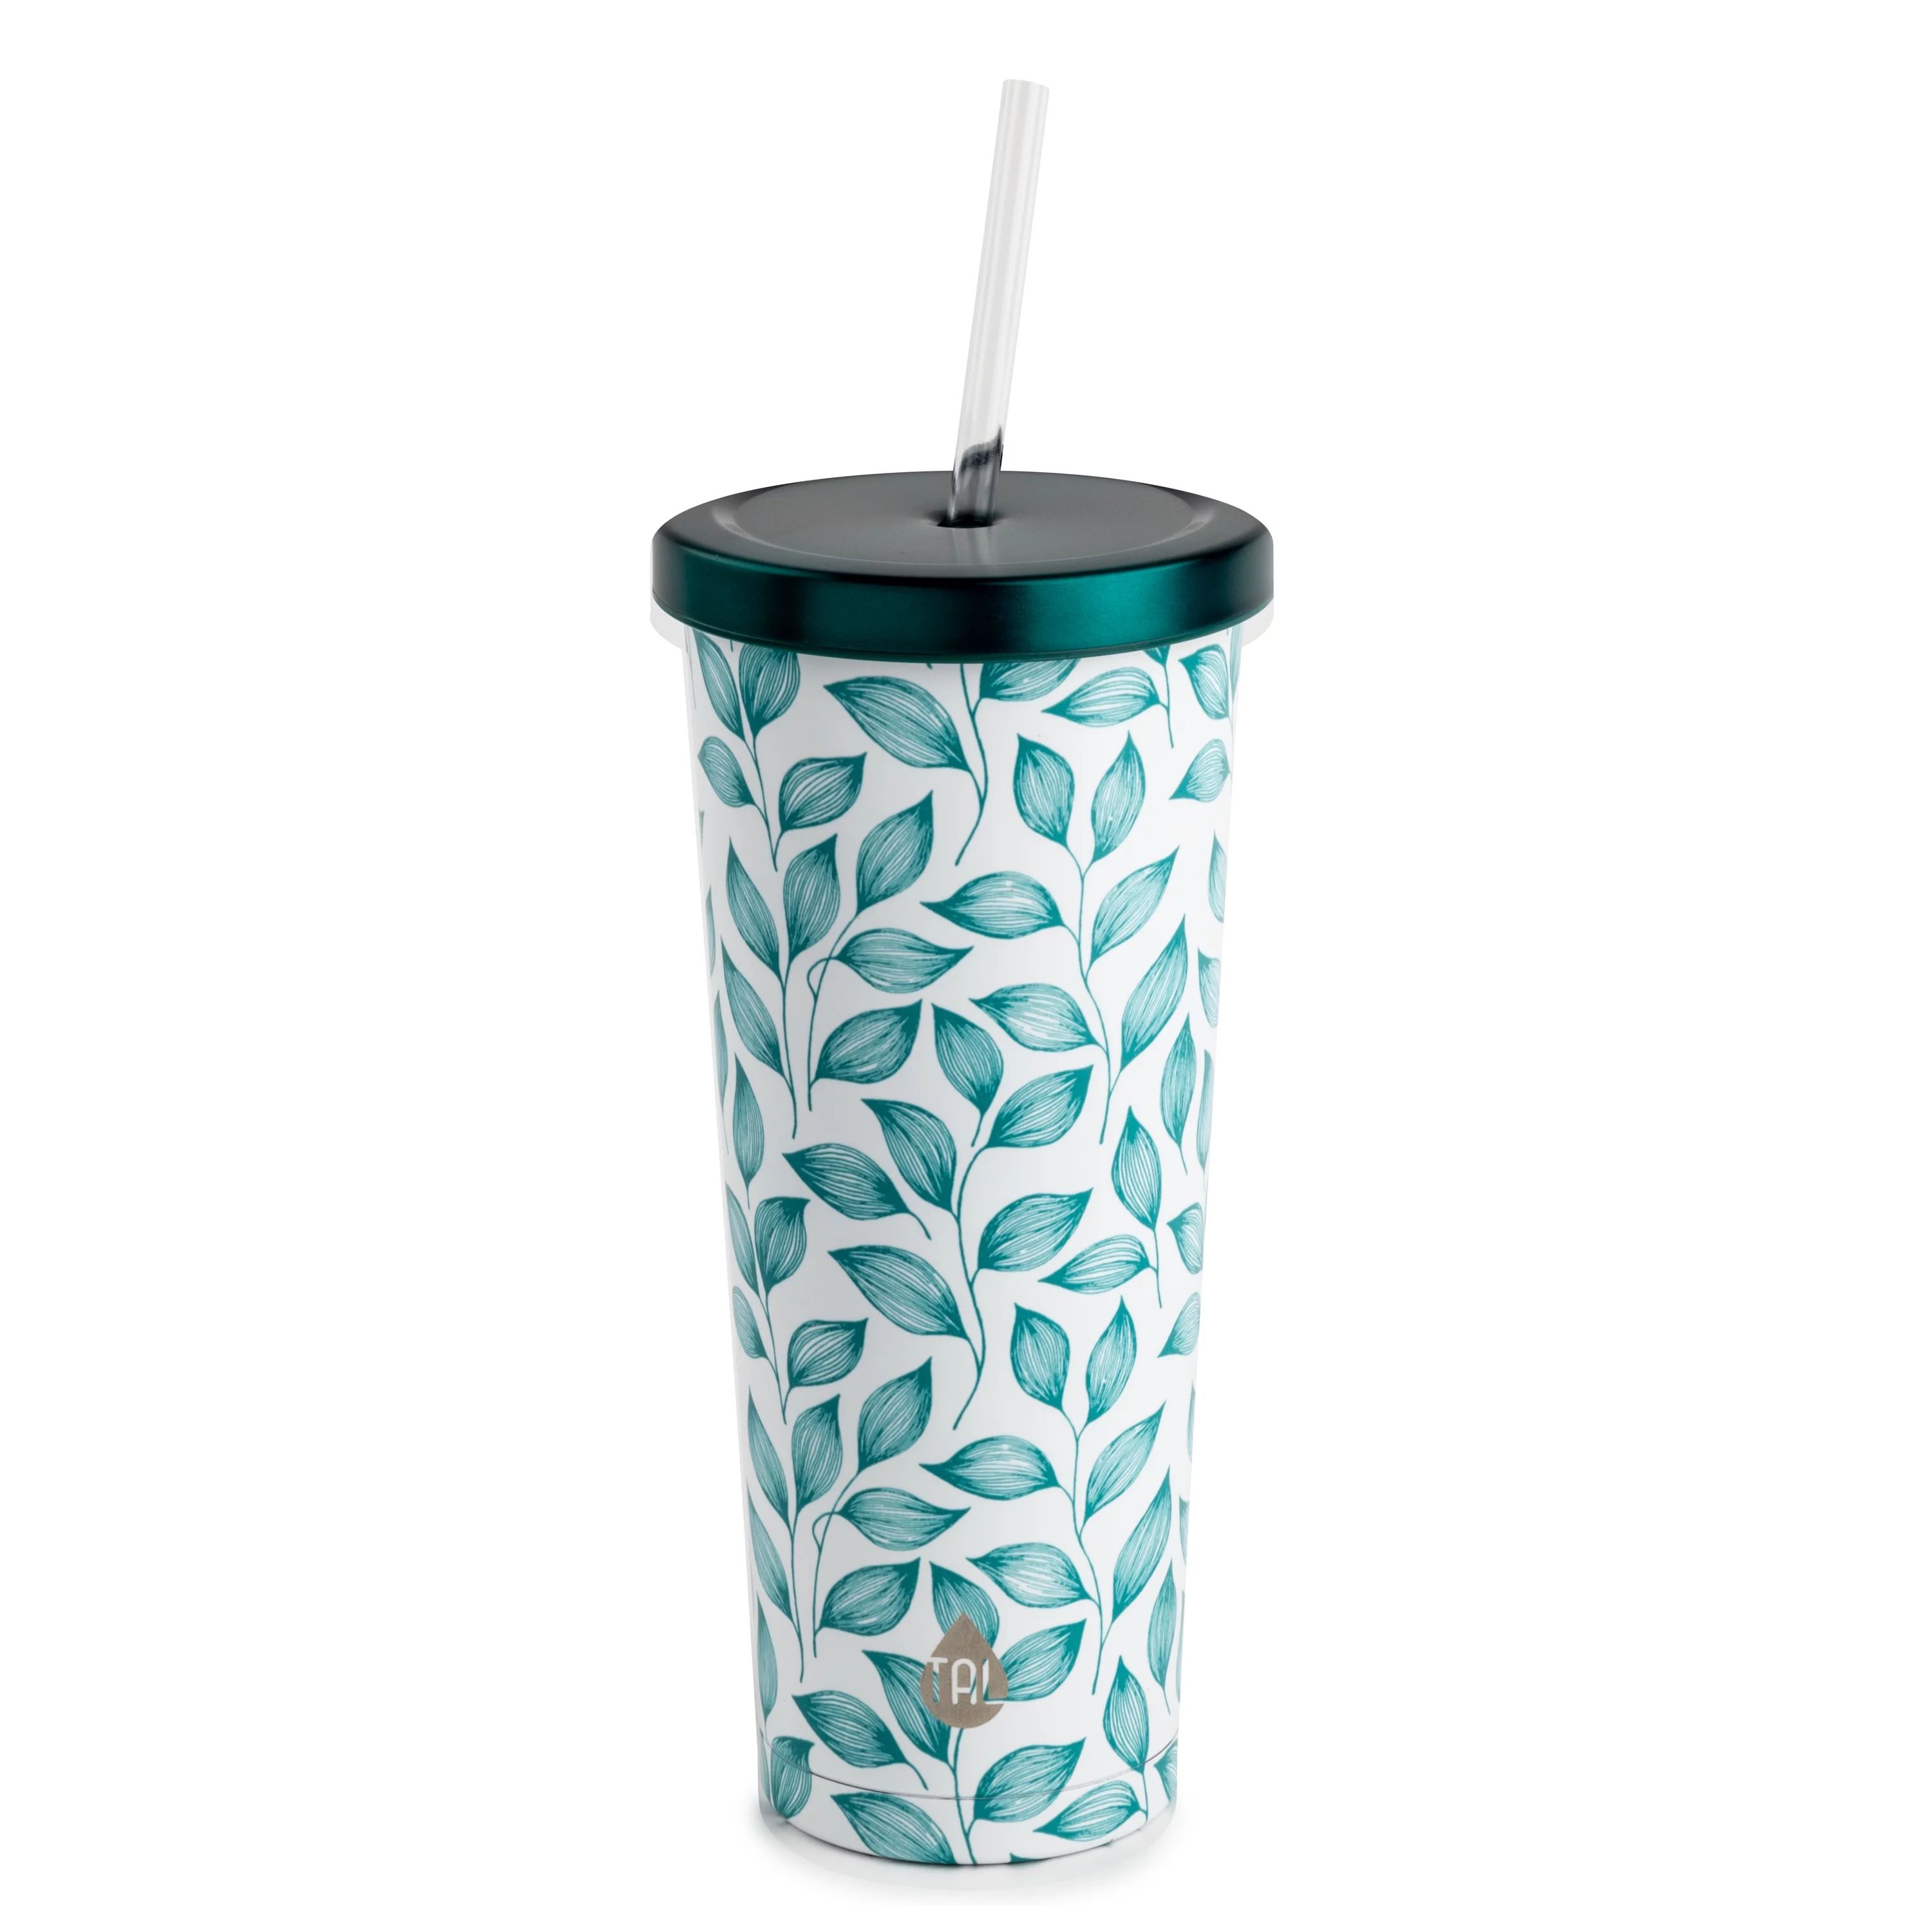 TAL Stainless Steel Coolie Tumbler with Straw 24 fl oz, Green Leaf | Walmart (US)